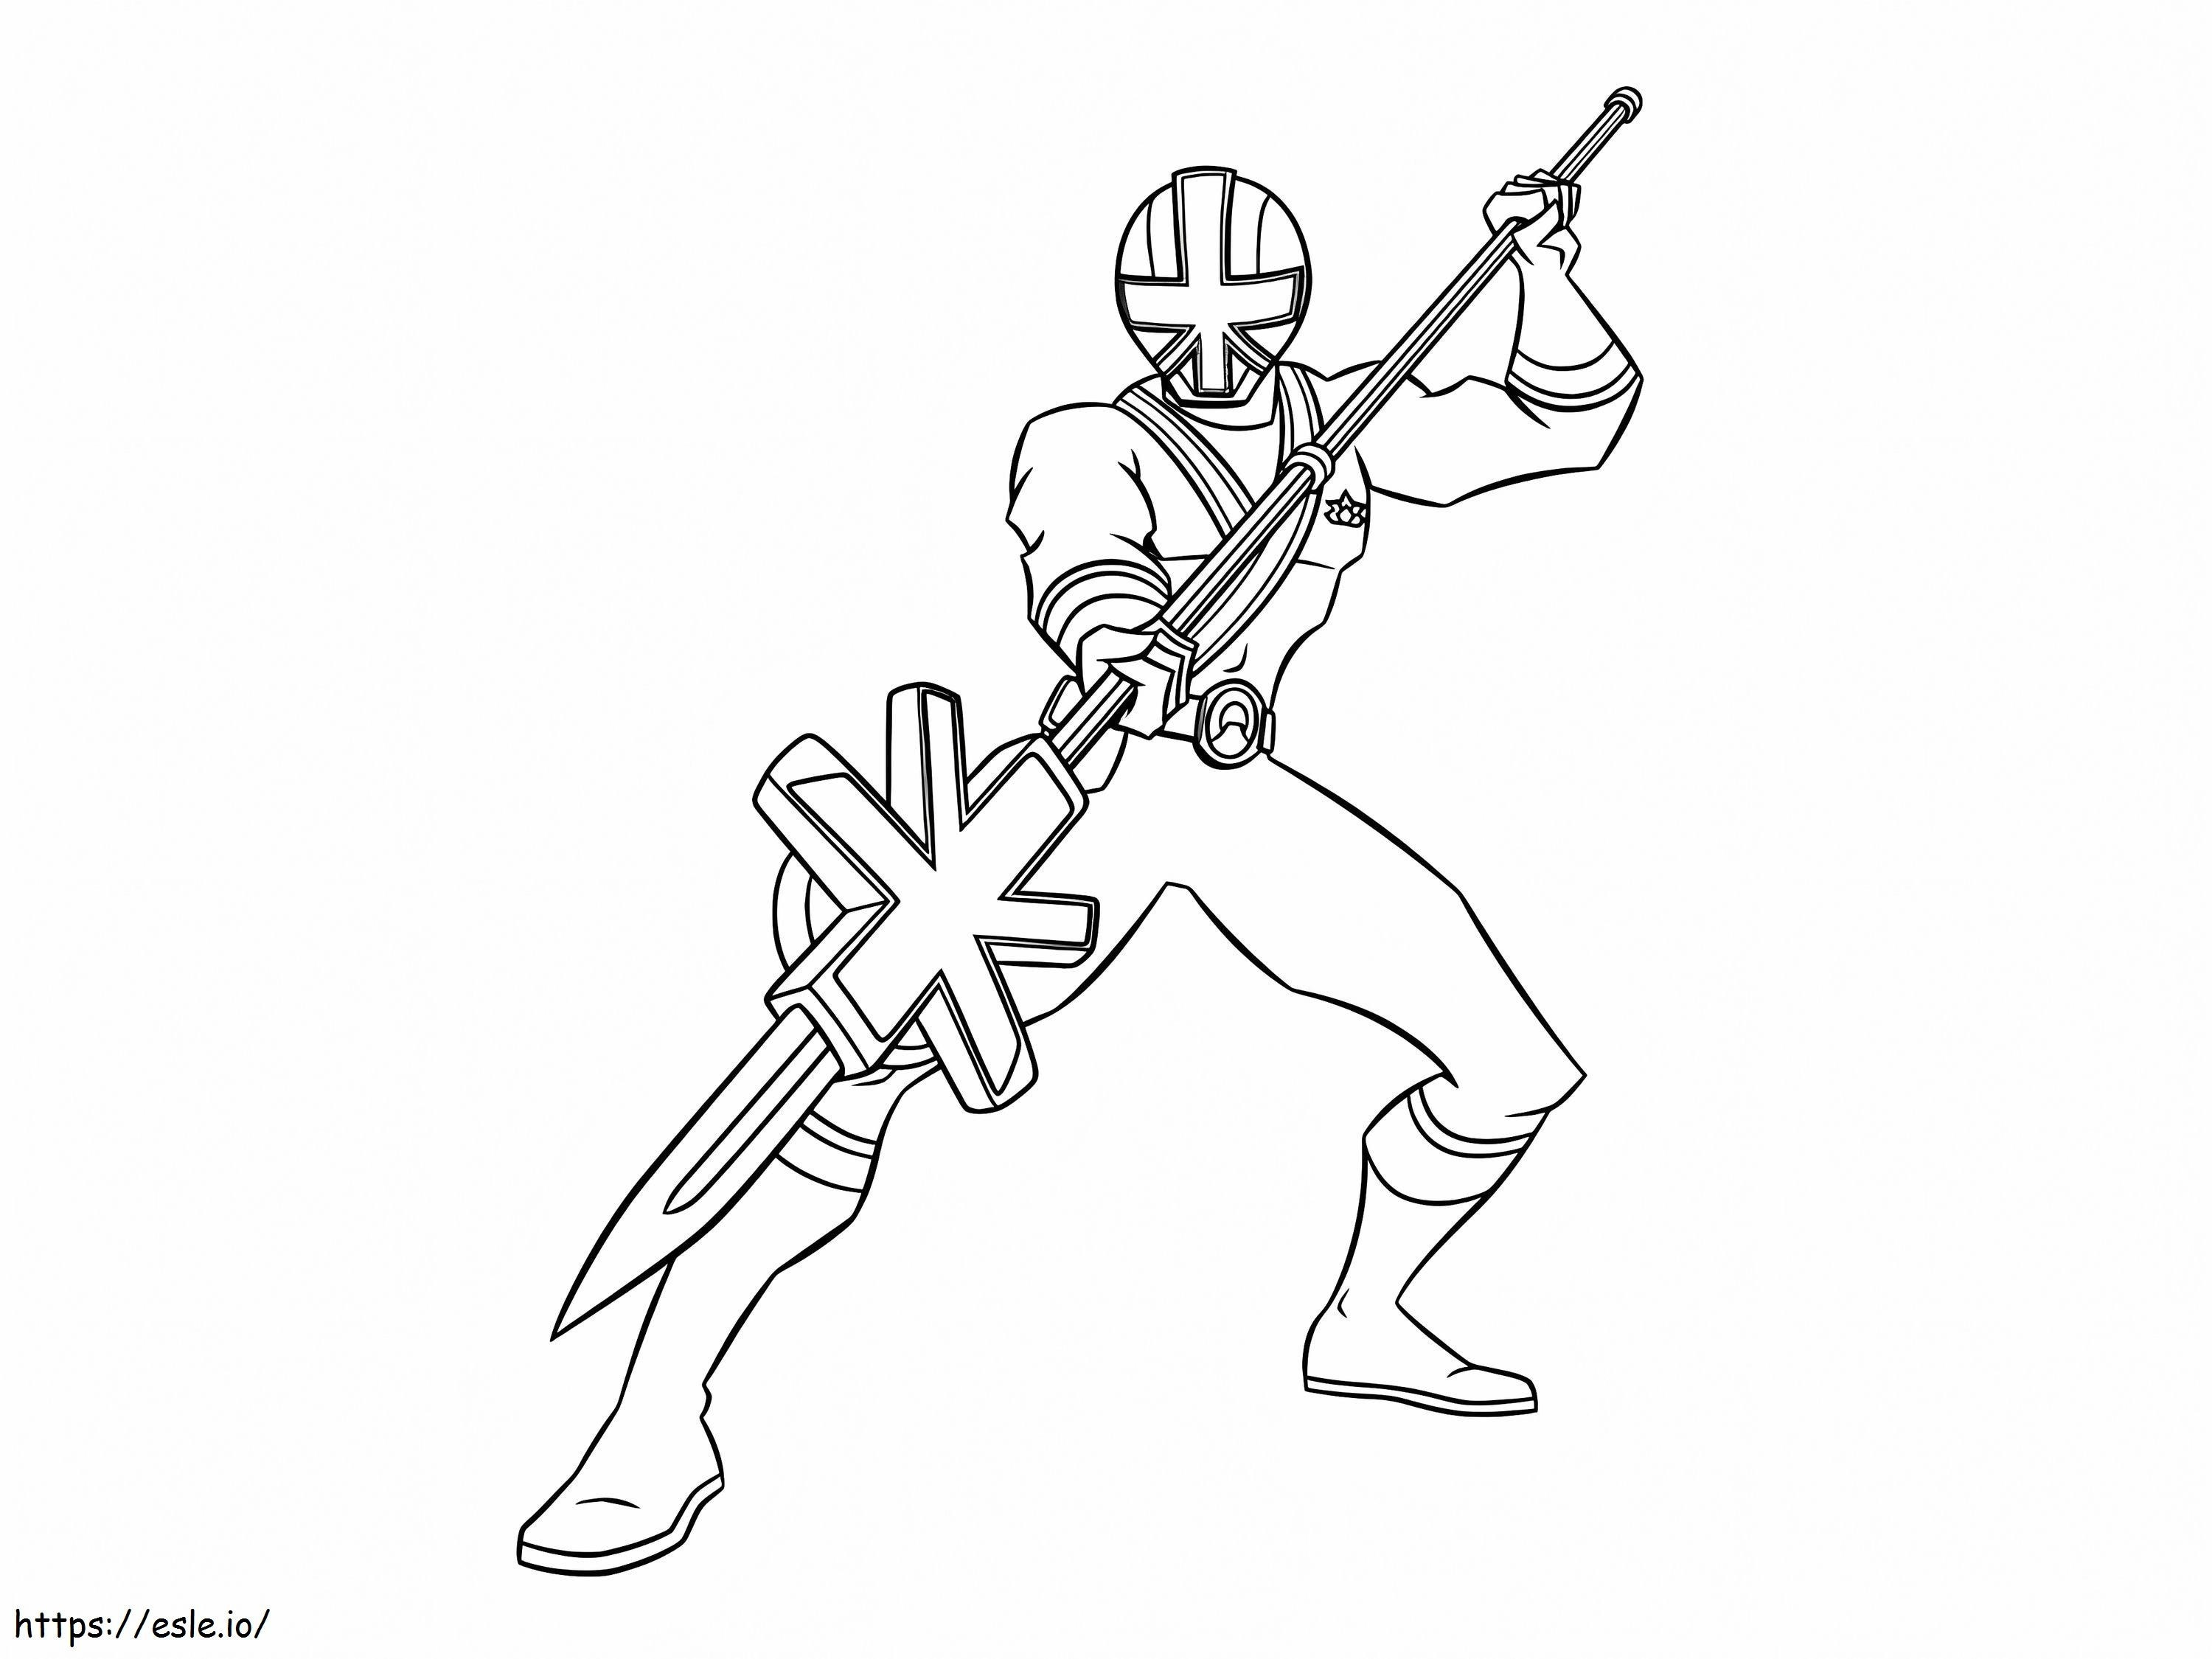 Power Rangers Samurai Holding A Spear coloring page